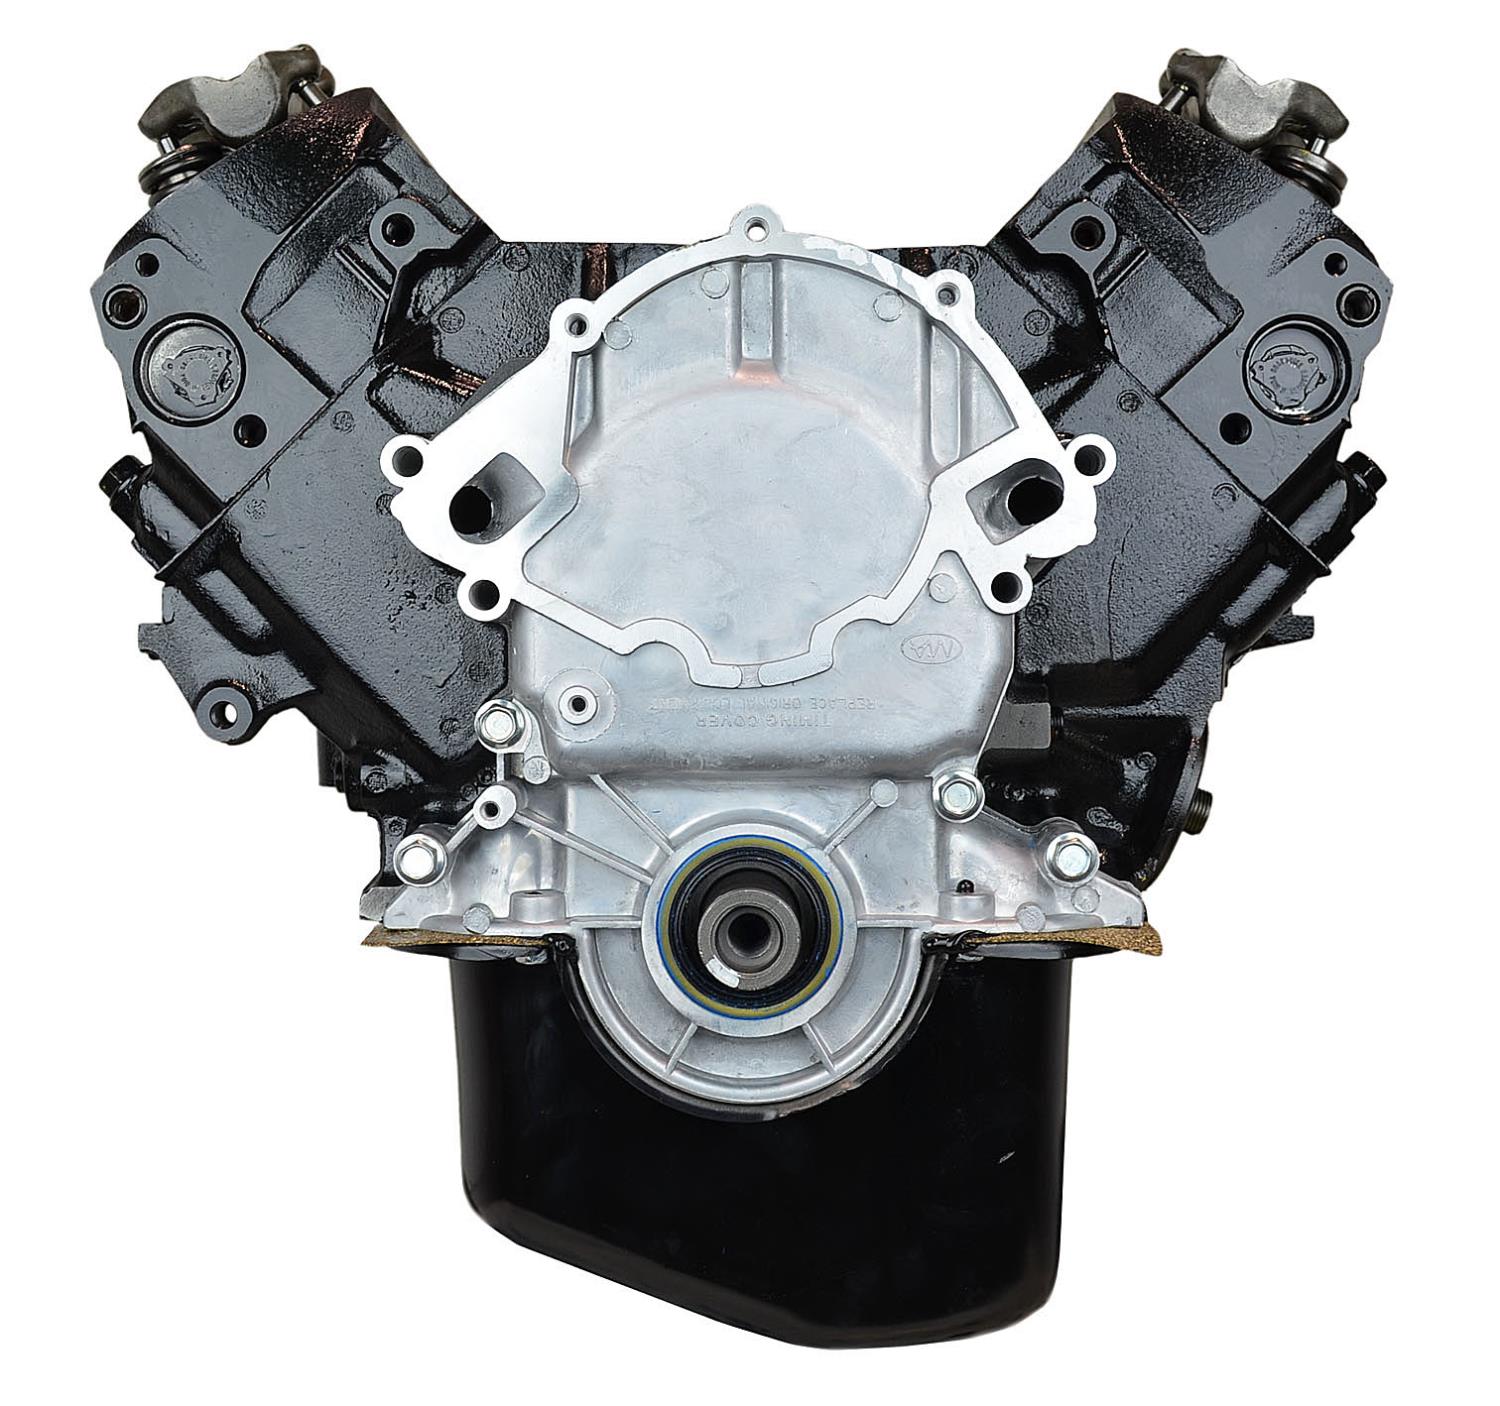 VFA1 Remanufactured Crate Engine for 1988-1993 Ford F-Series Truck & E-Series Van with 351W V8